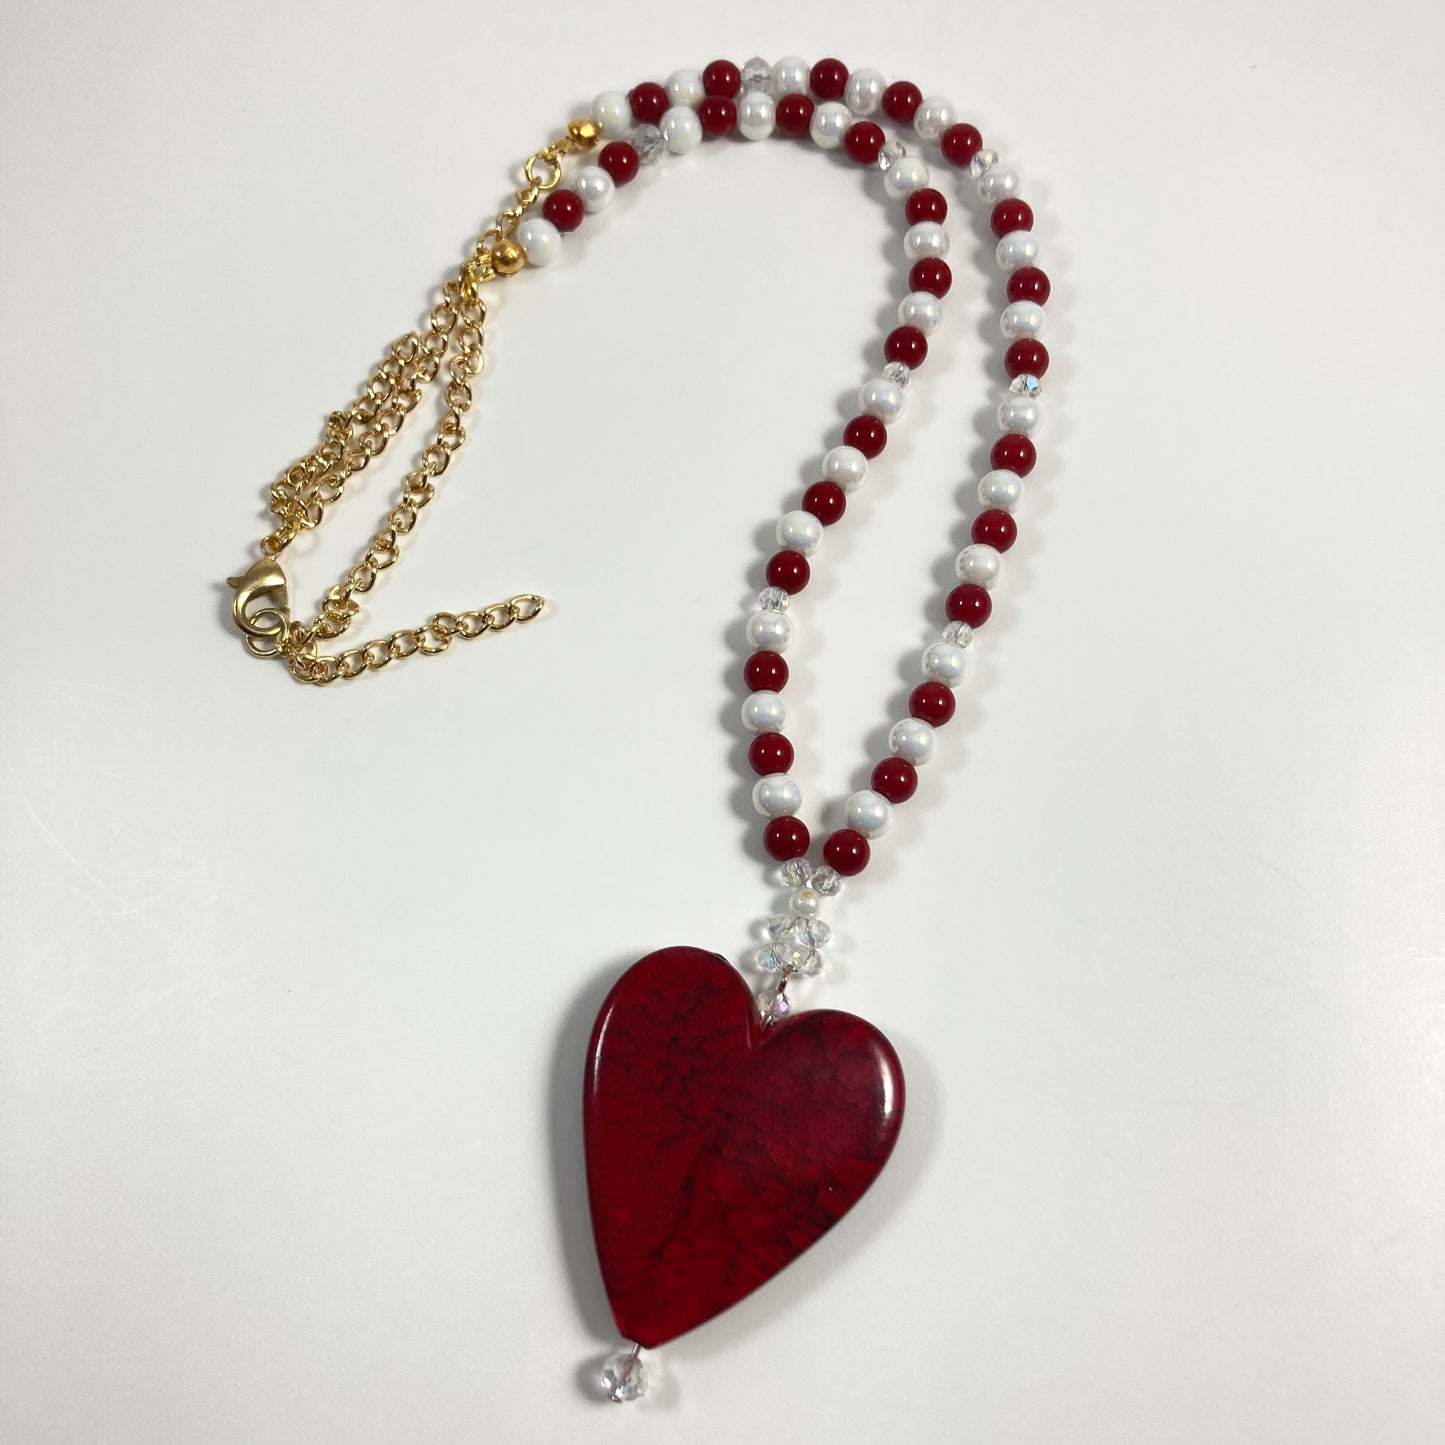 N24-C3 - Red, White & Clear Necklace w/ Red  Heart Focal on Gold Chain